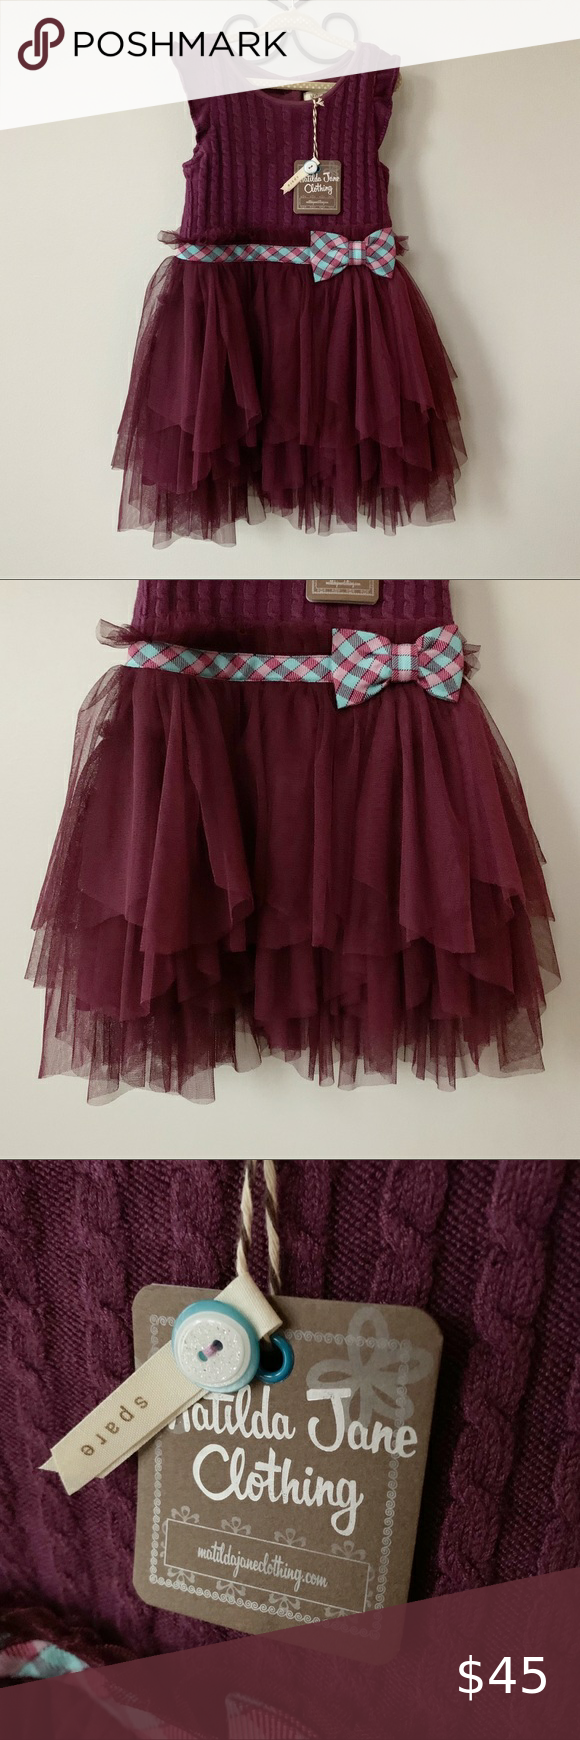 Matilda Jane Once Upon a Time SOIREE Dress Size 4